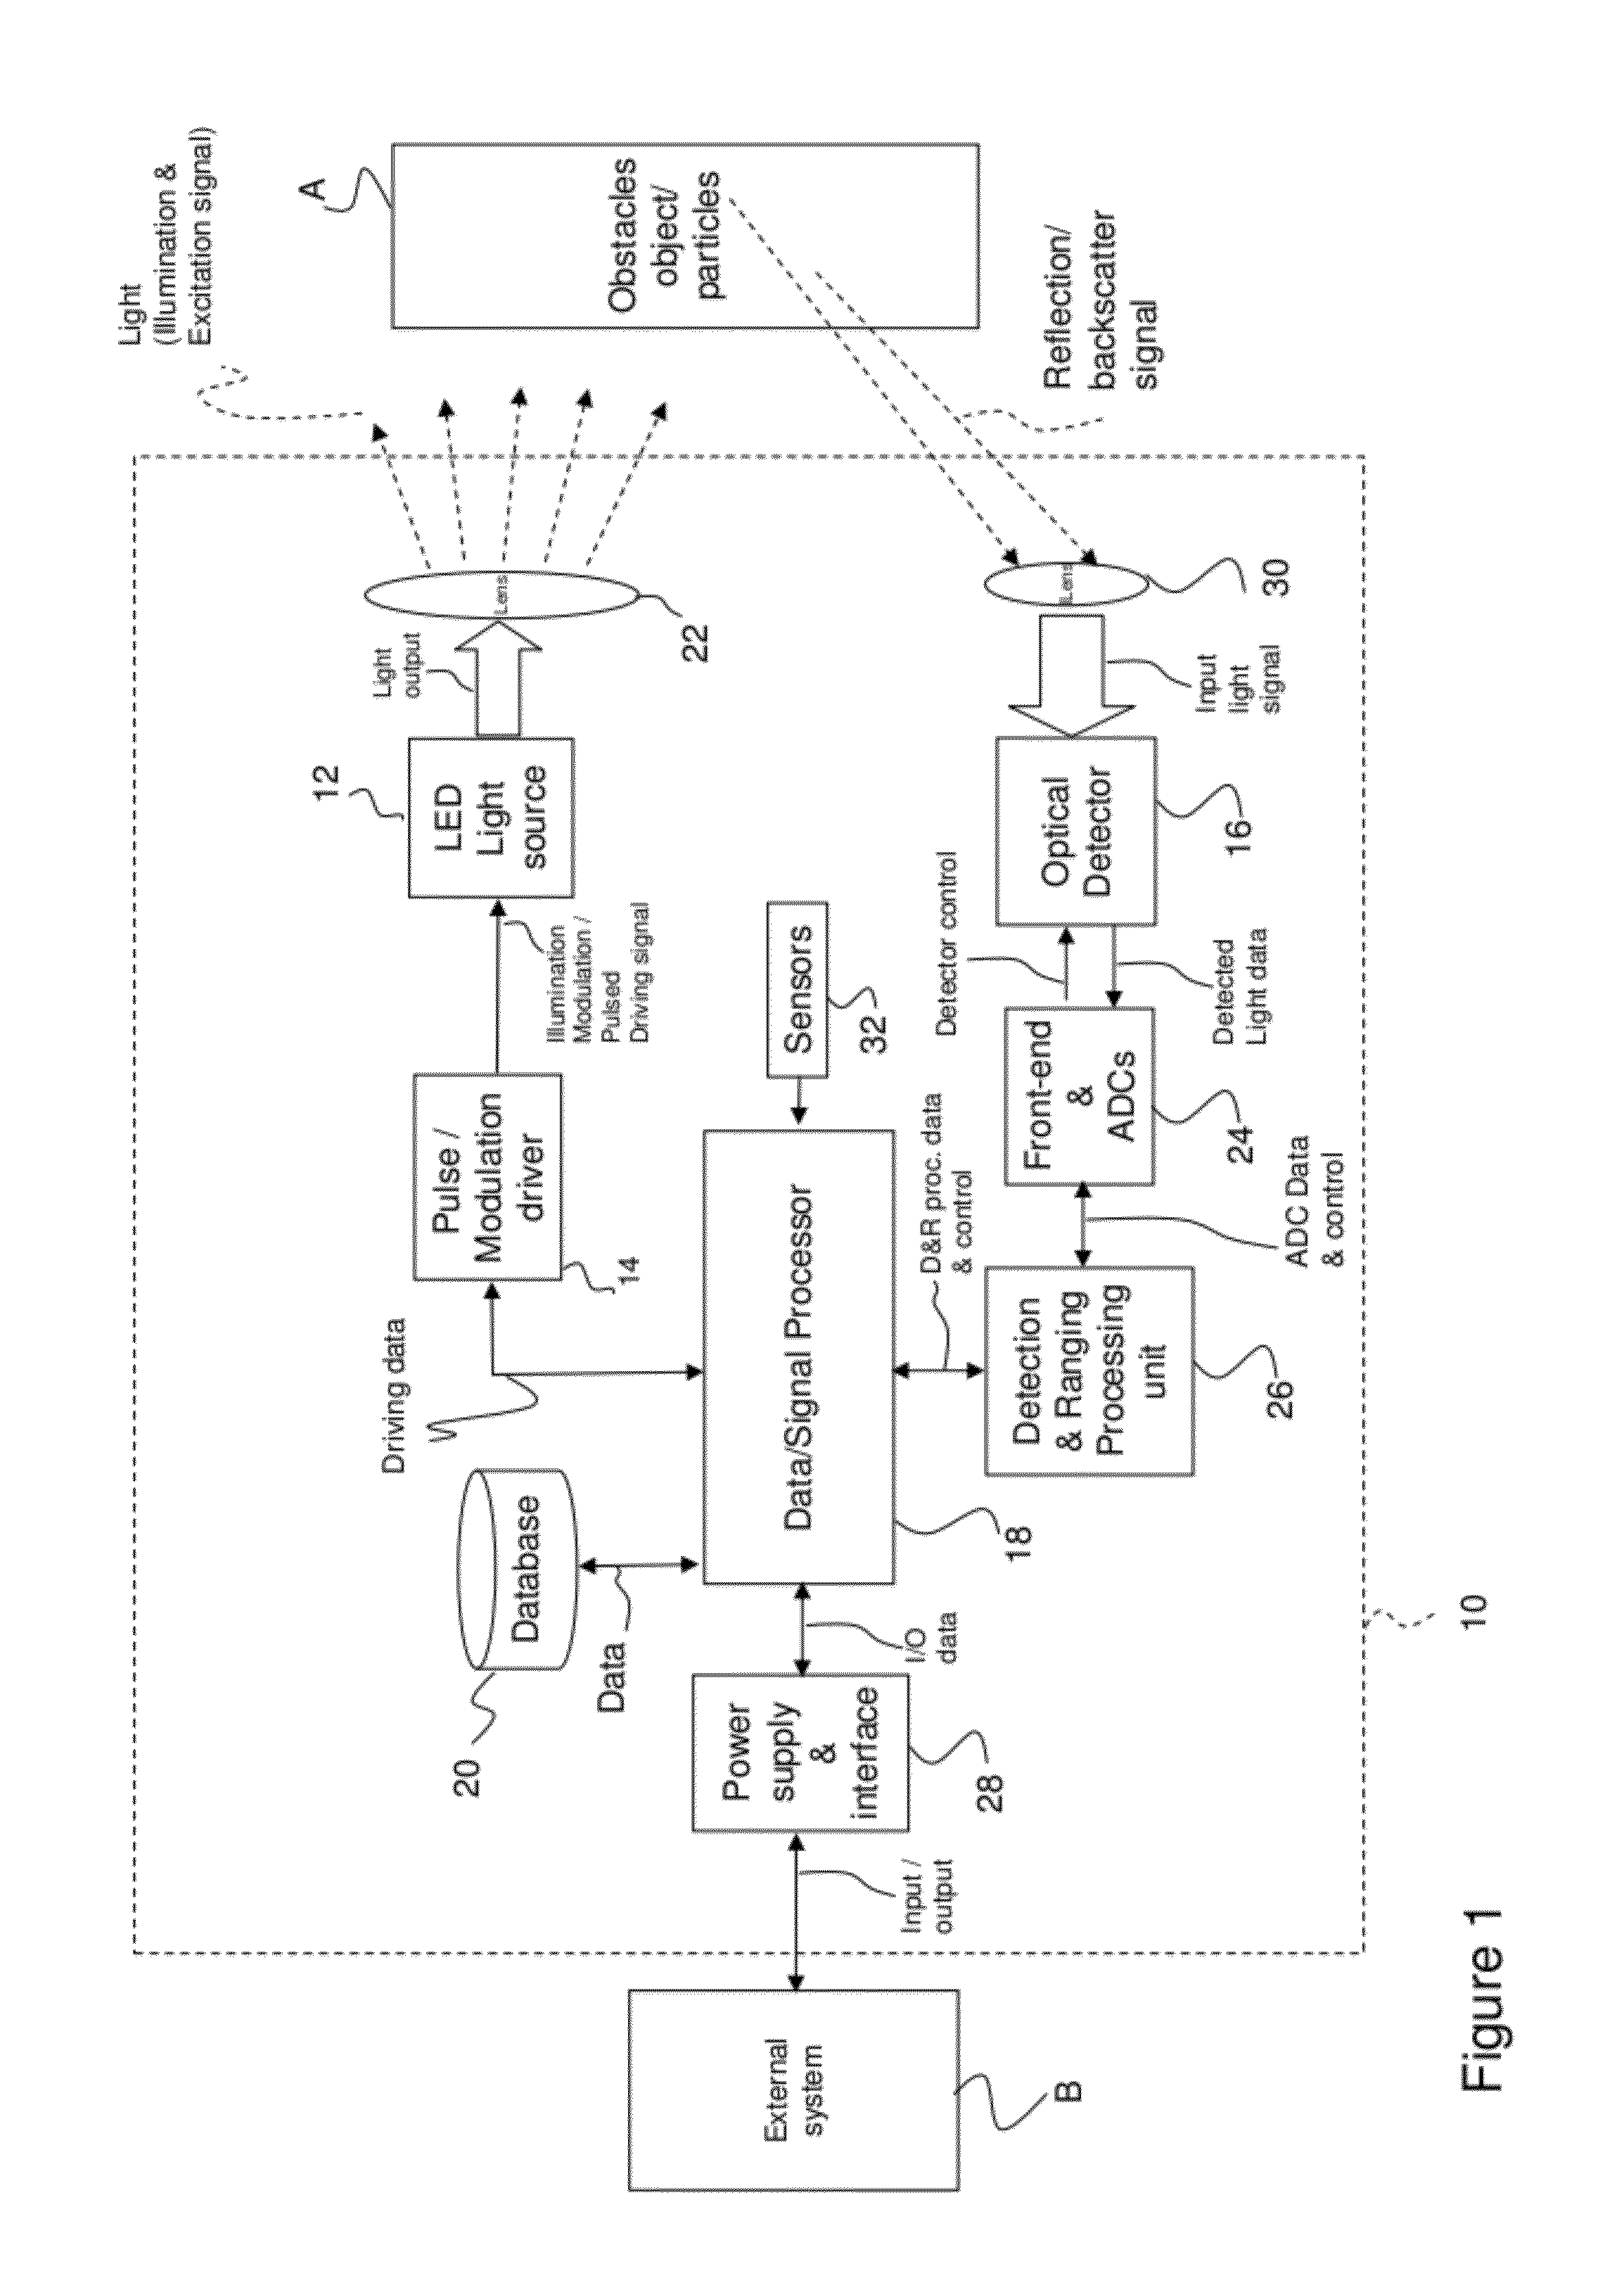 LED object detection system and method combining complete reflection traces from individual narrow field-of-view channels